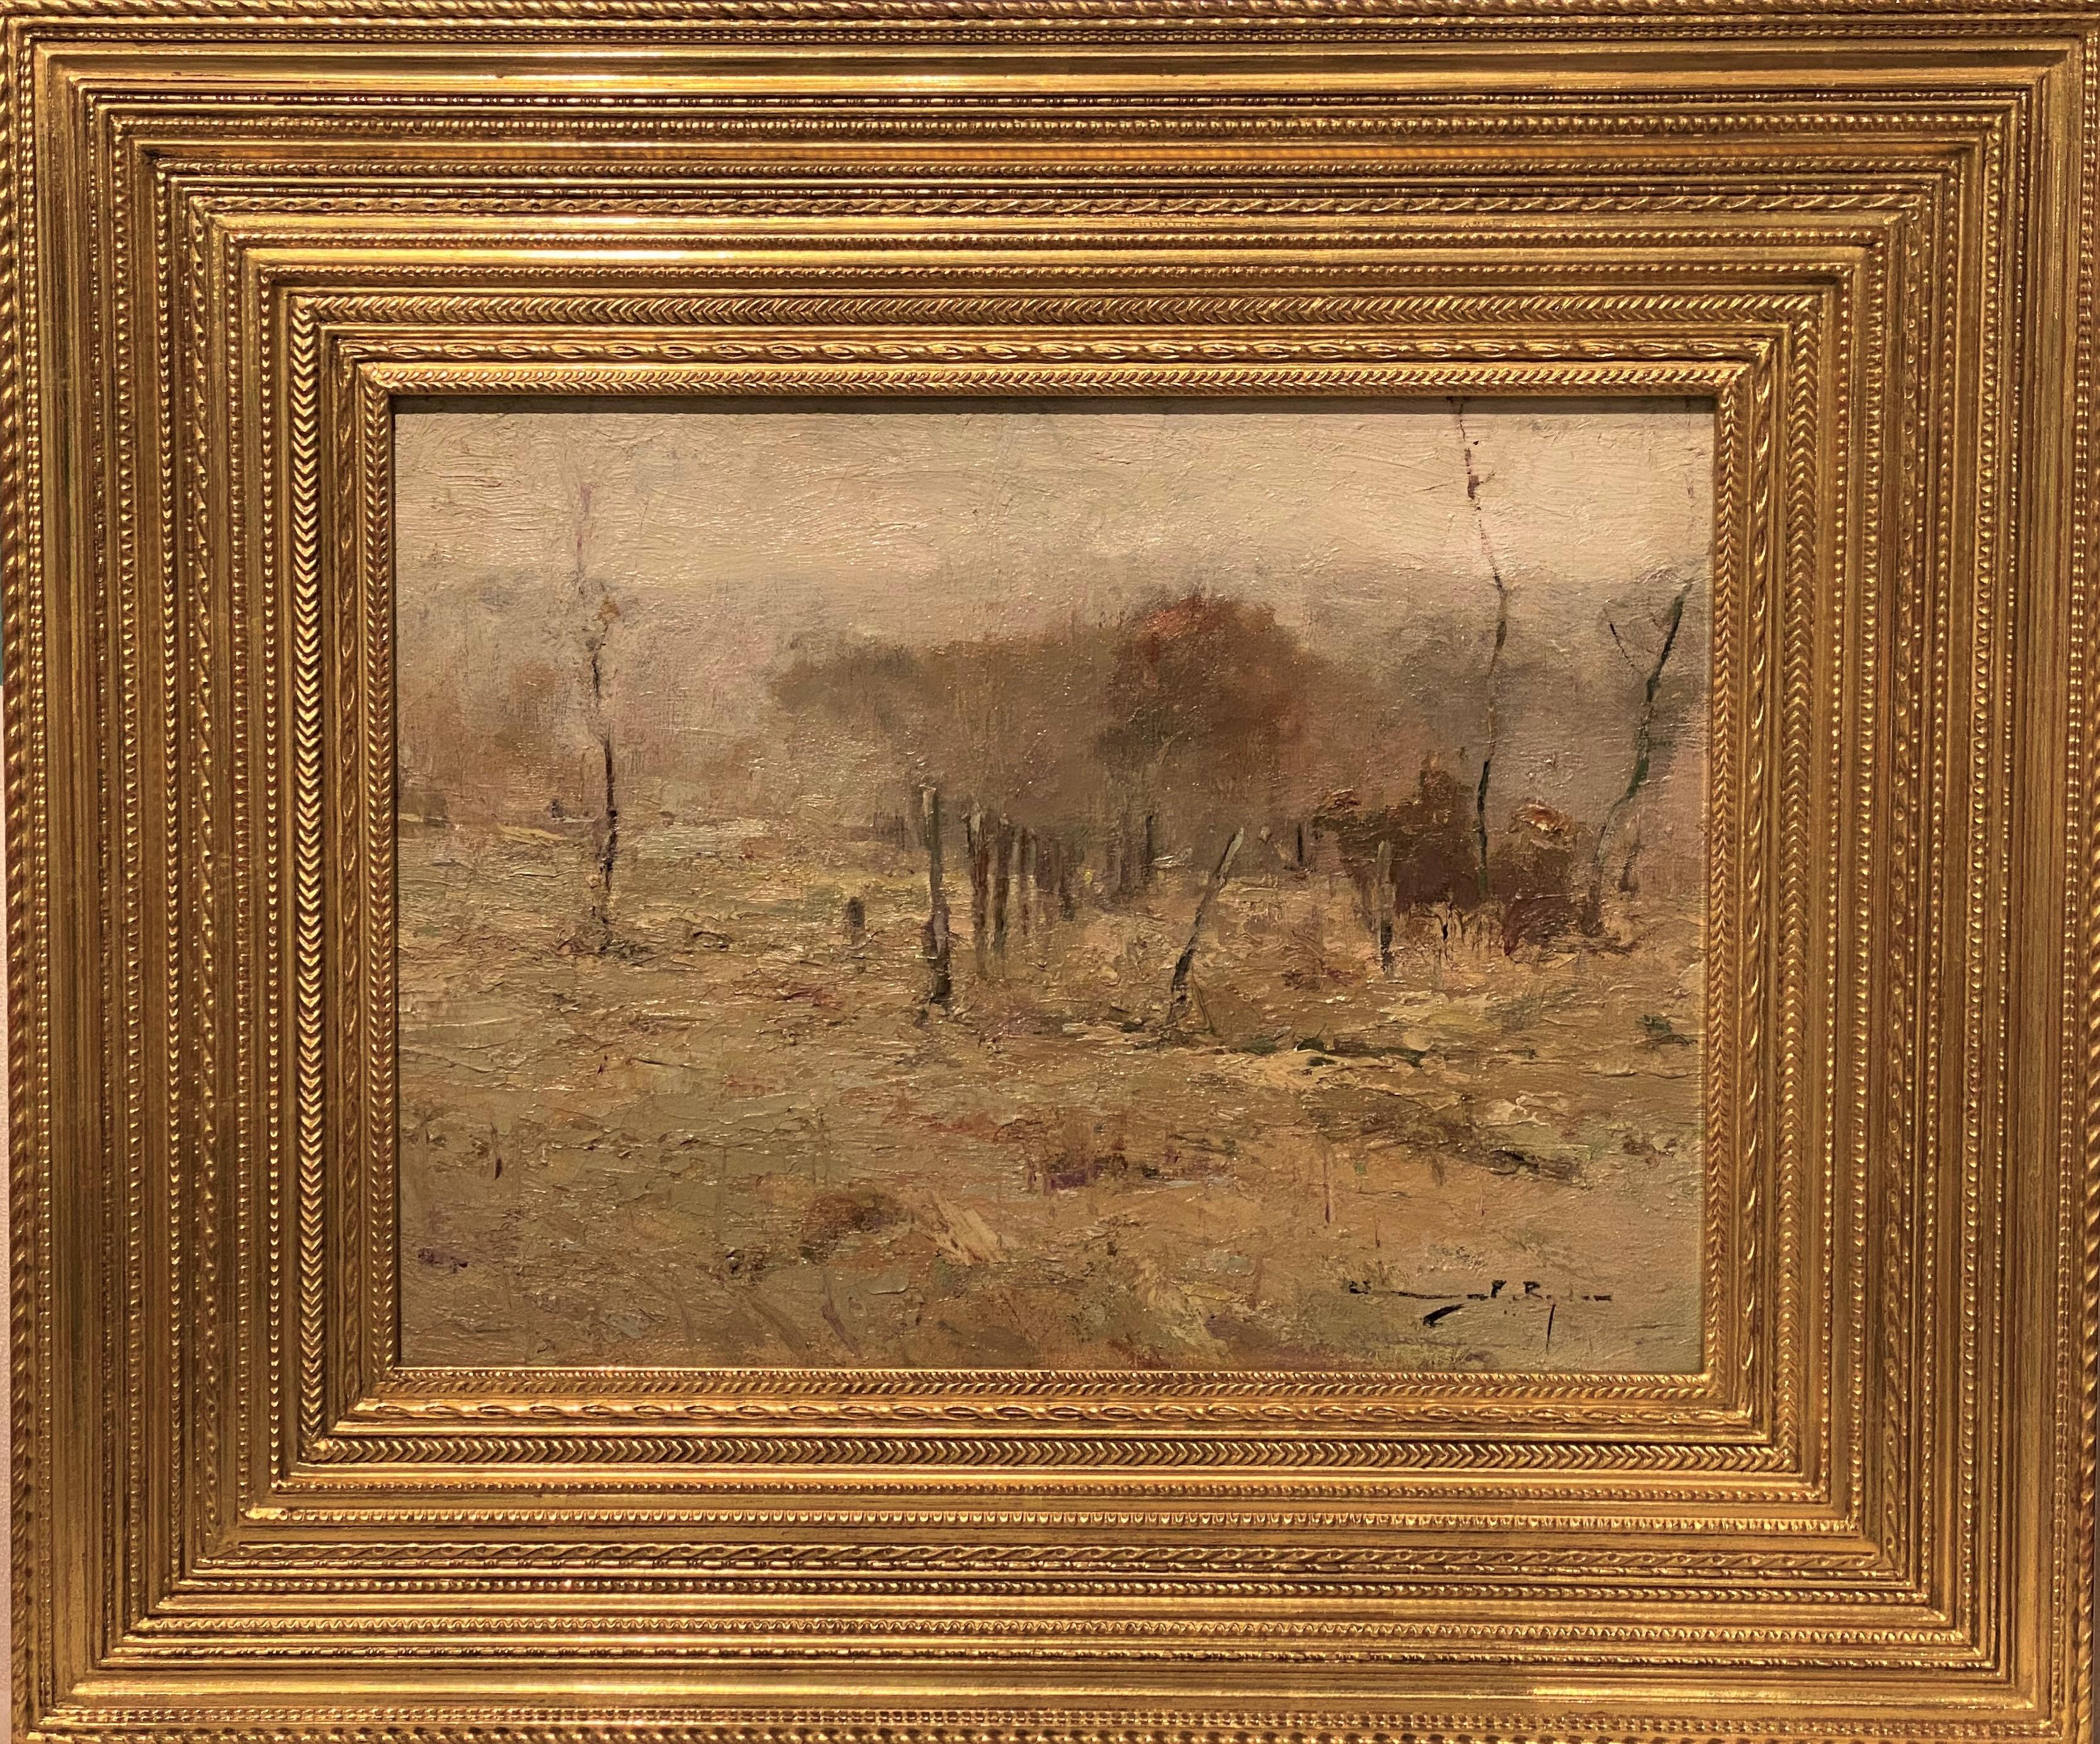 Chauncey Foster Ryder Landscape Painting - Landscape with Trees